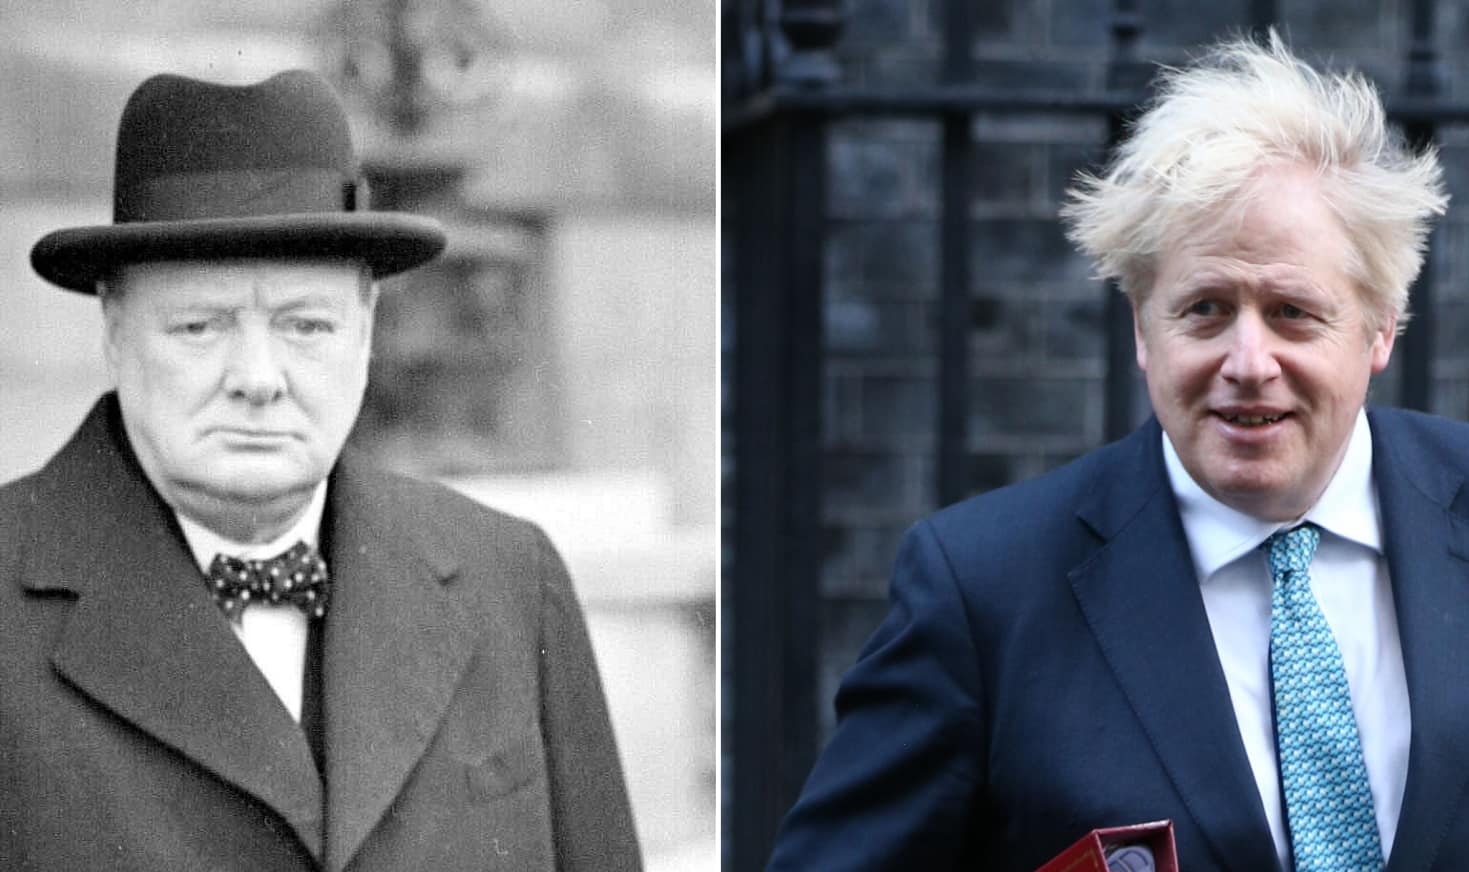 Churchill admirer Johnson slams charity for ‘airbrushing’ him out – we look at Winston’s views on race